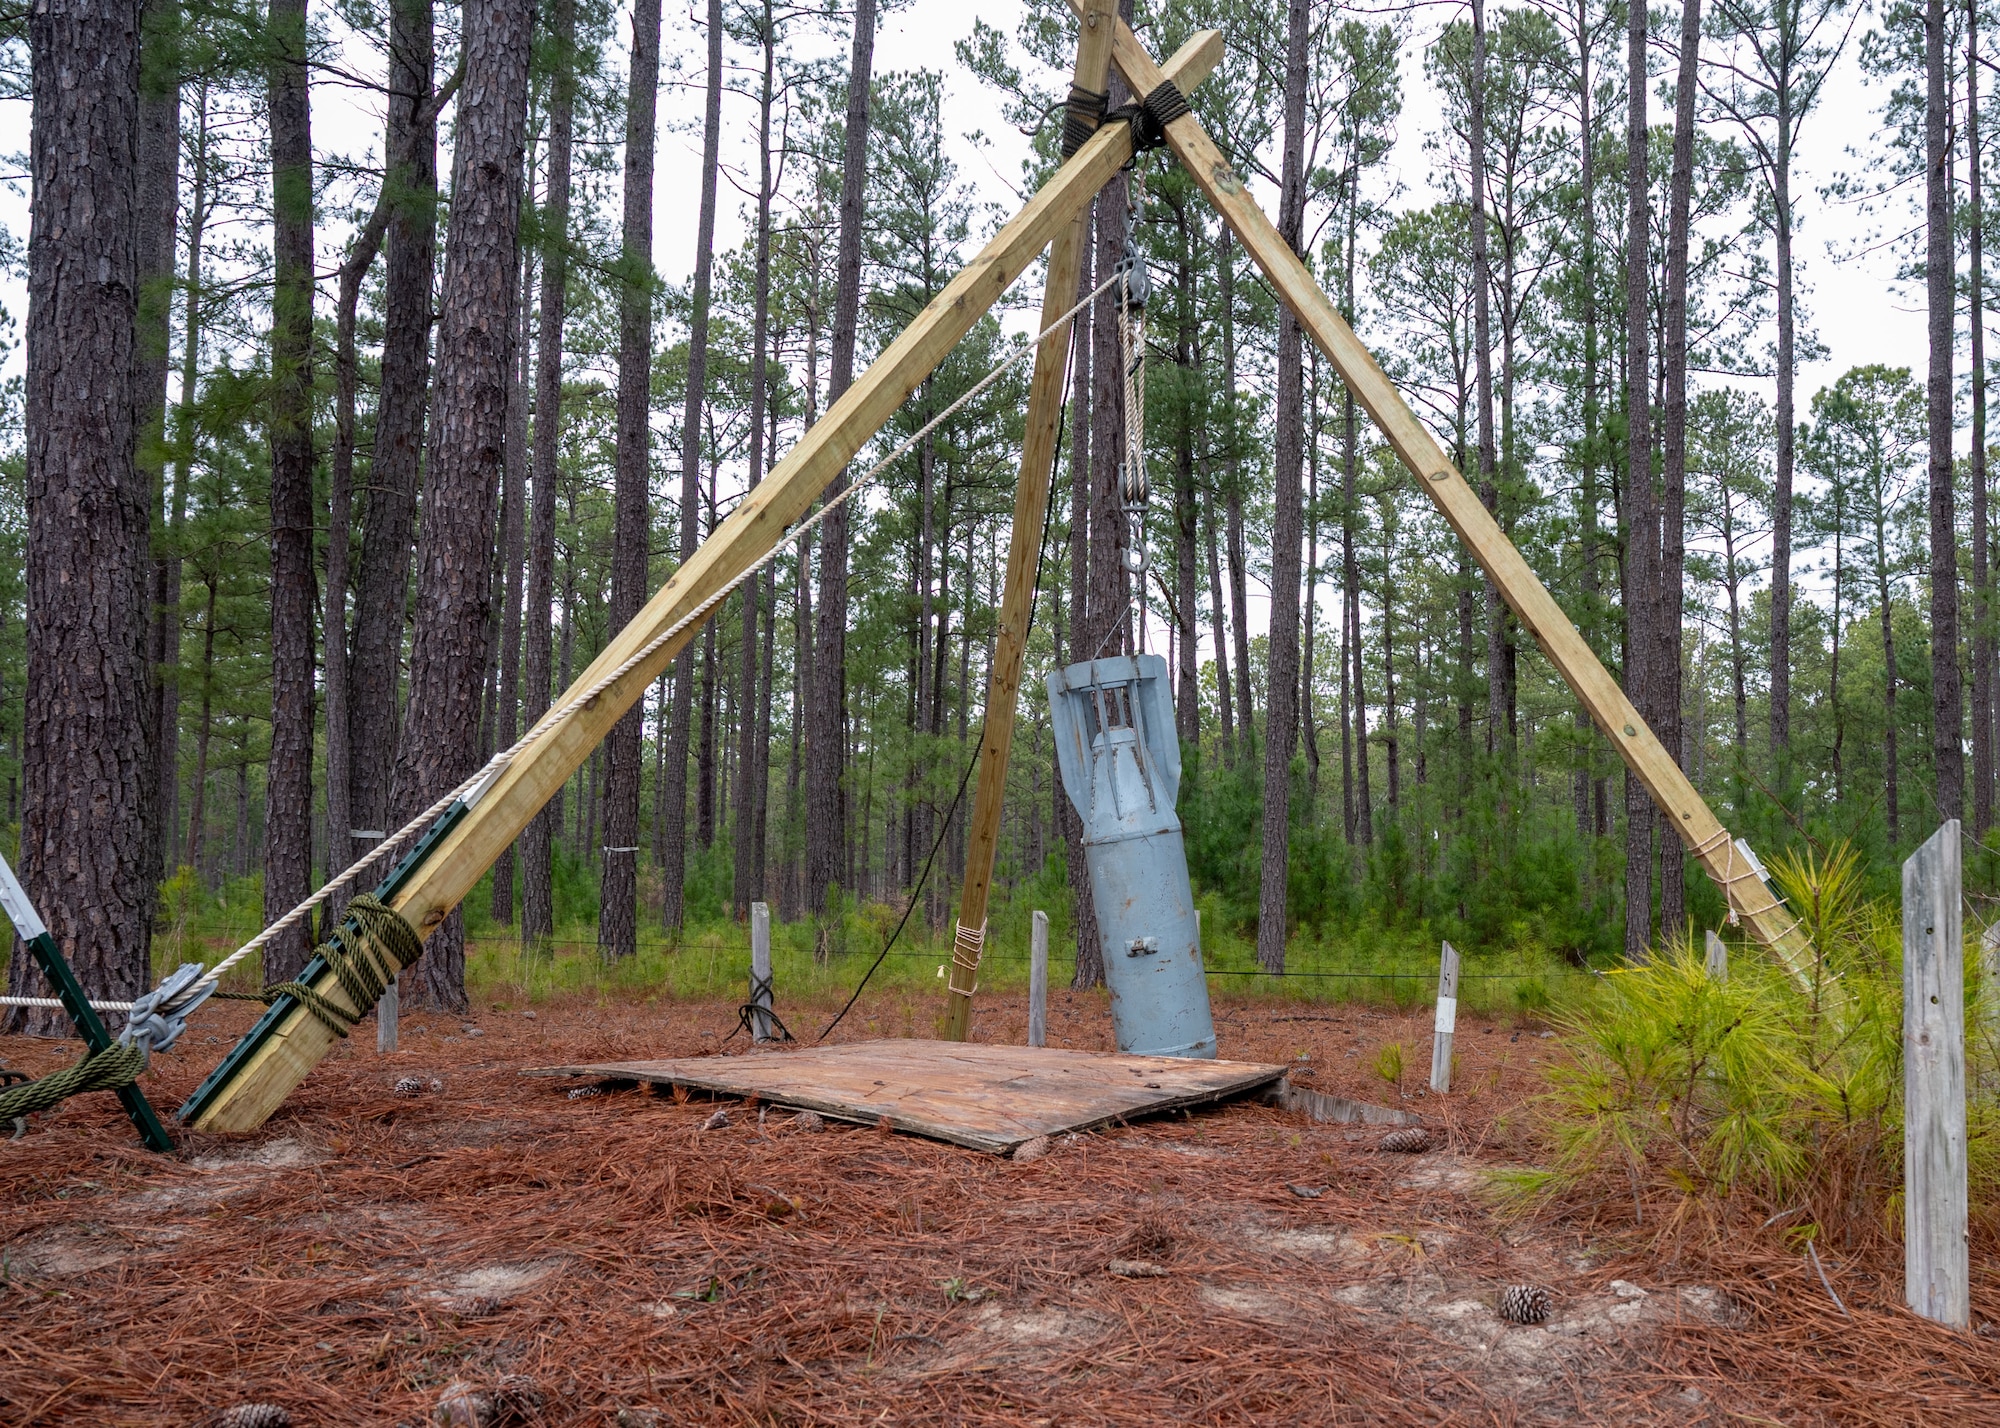 A wooden scaffold with a pulley hoists a training munition out of a hole.